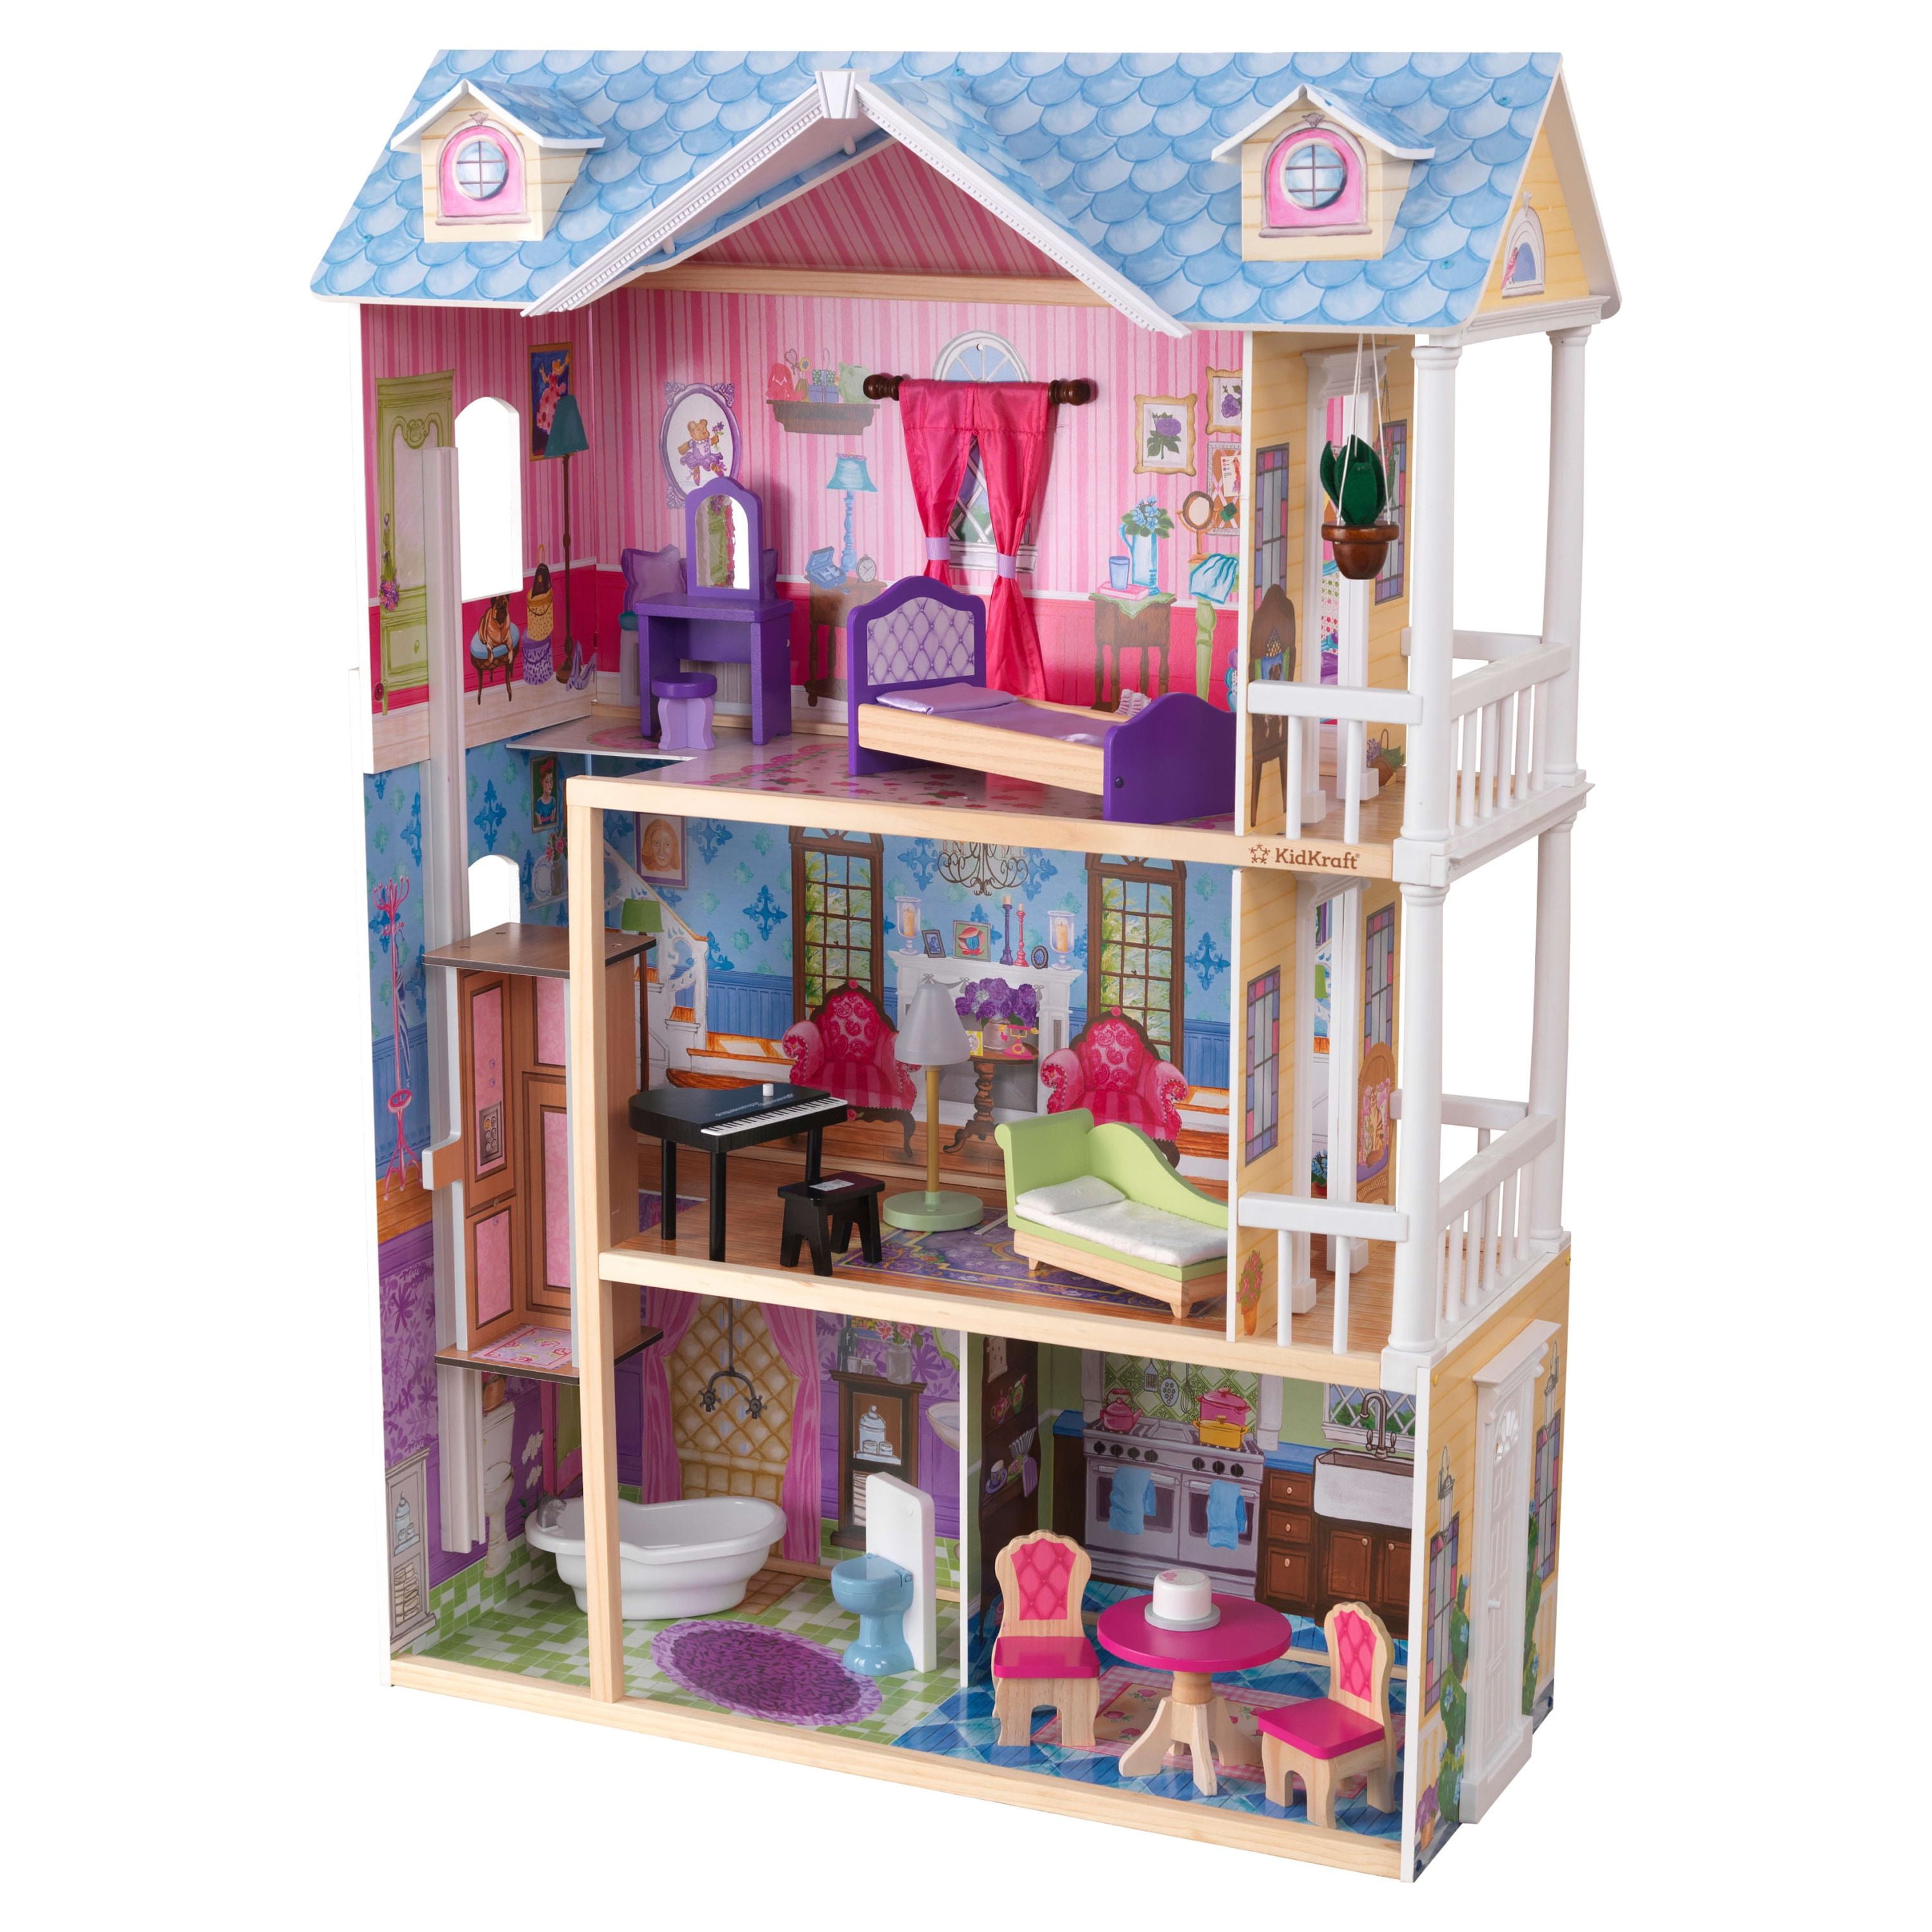 MDF Wooden Dreamy Dollhouse, Gift for Kids TOY-CYEL-152 - The Home Depot